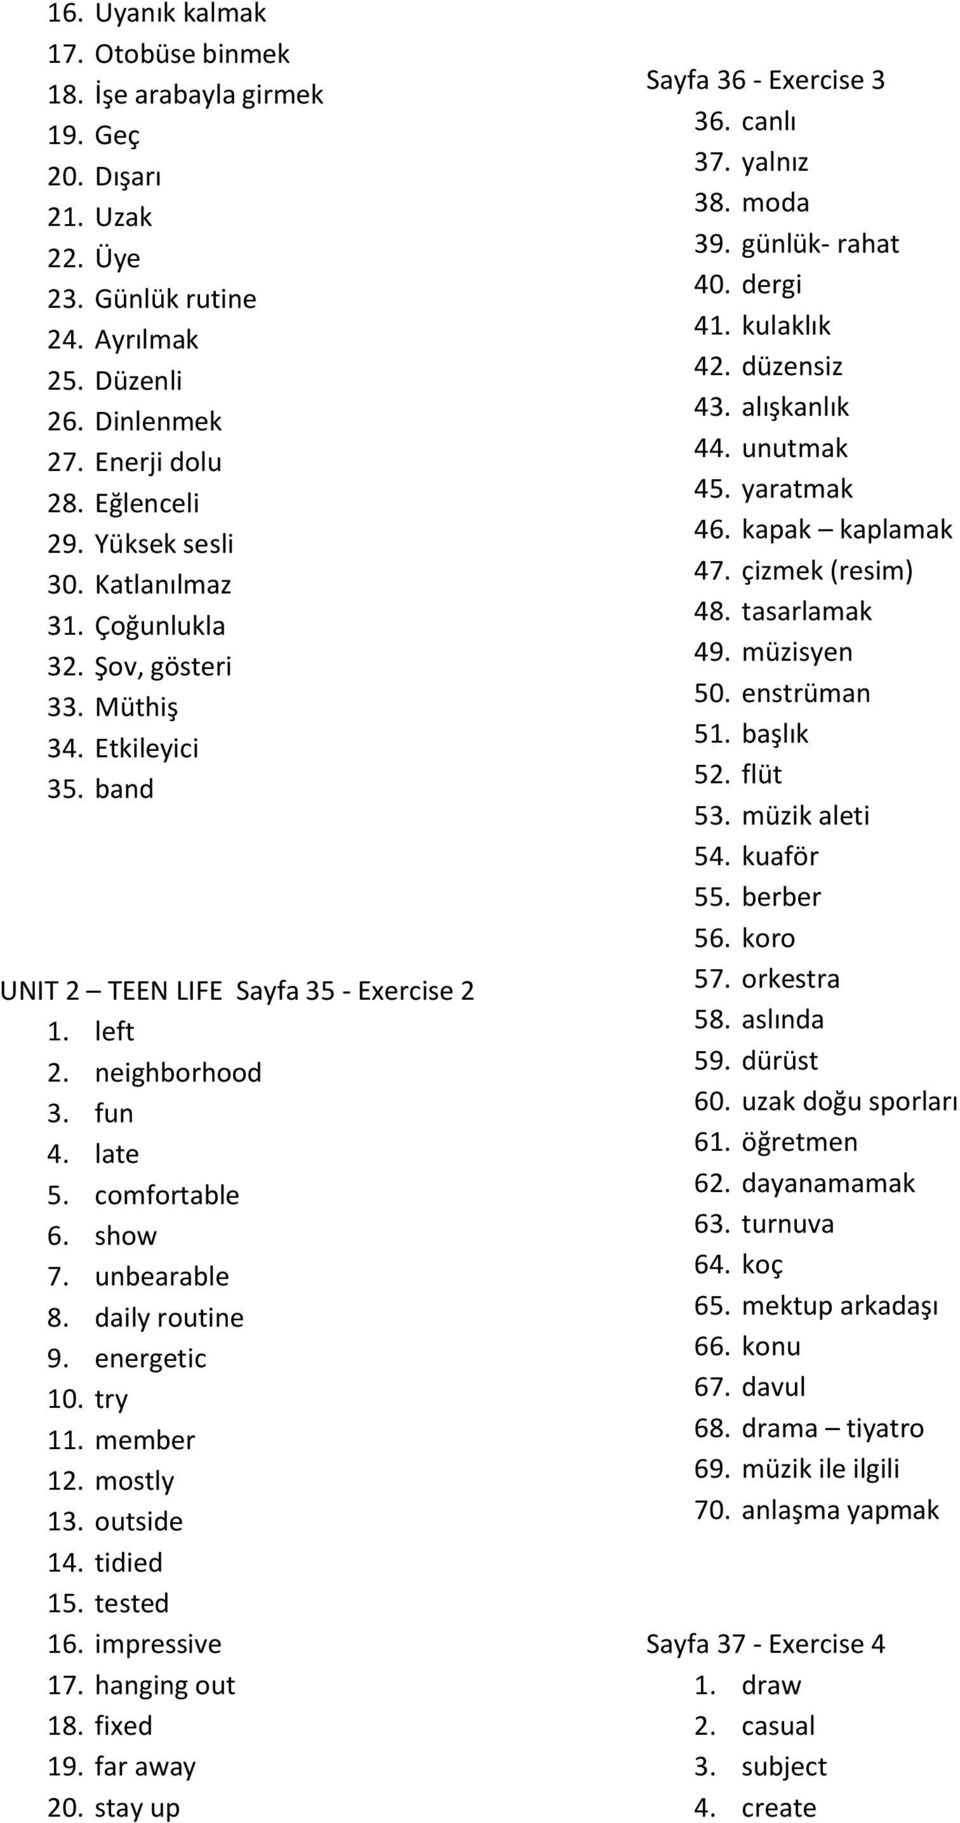 unbearable 8. daily routine 9. energetic 10. try 11. member 12. mostly 13. outside 14. tidied 15. tested 16. impressive 17. hanging out 18. fixed 19. far away 20. stay up Sayfa 36 - Exercise 3 36.